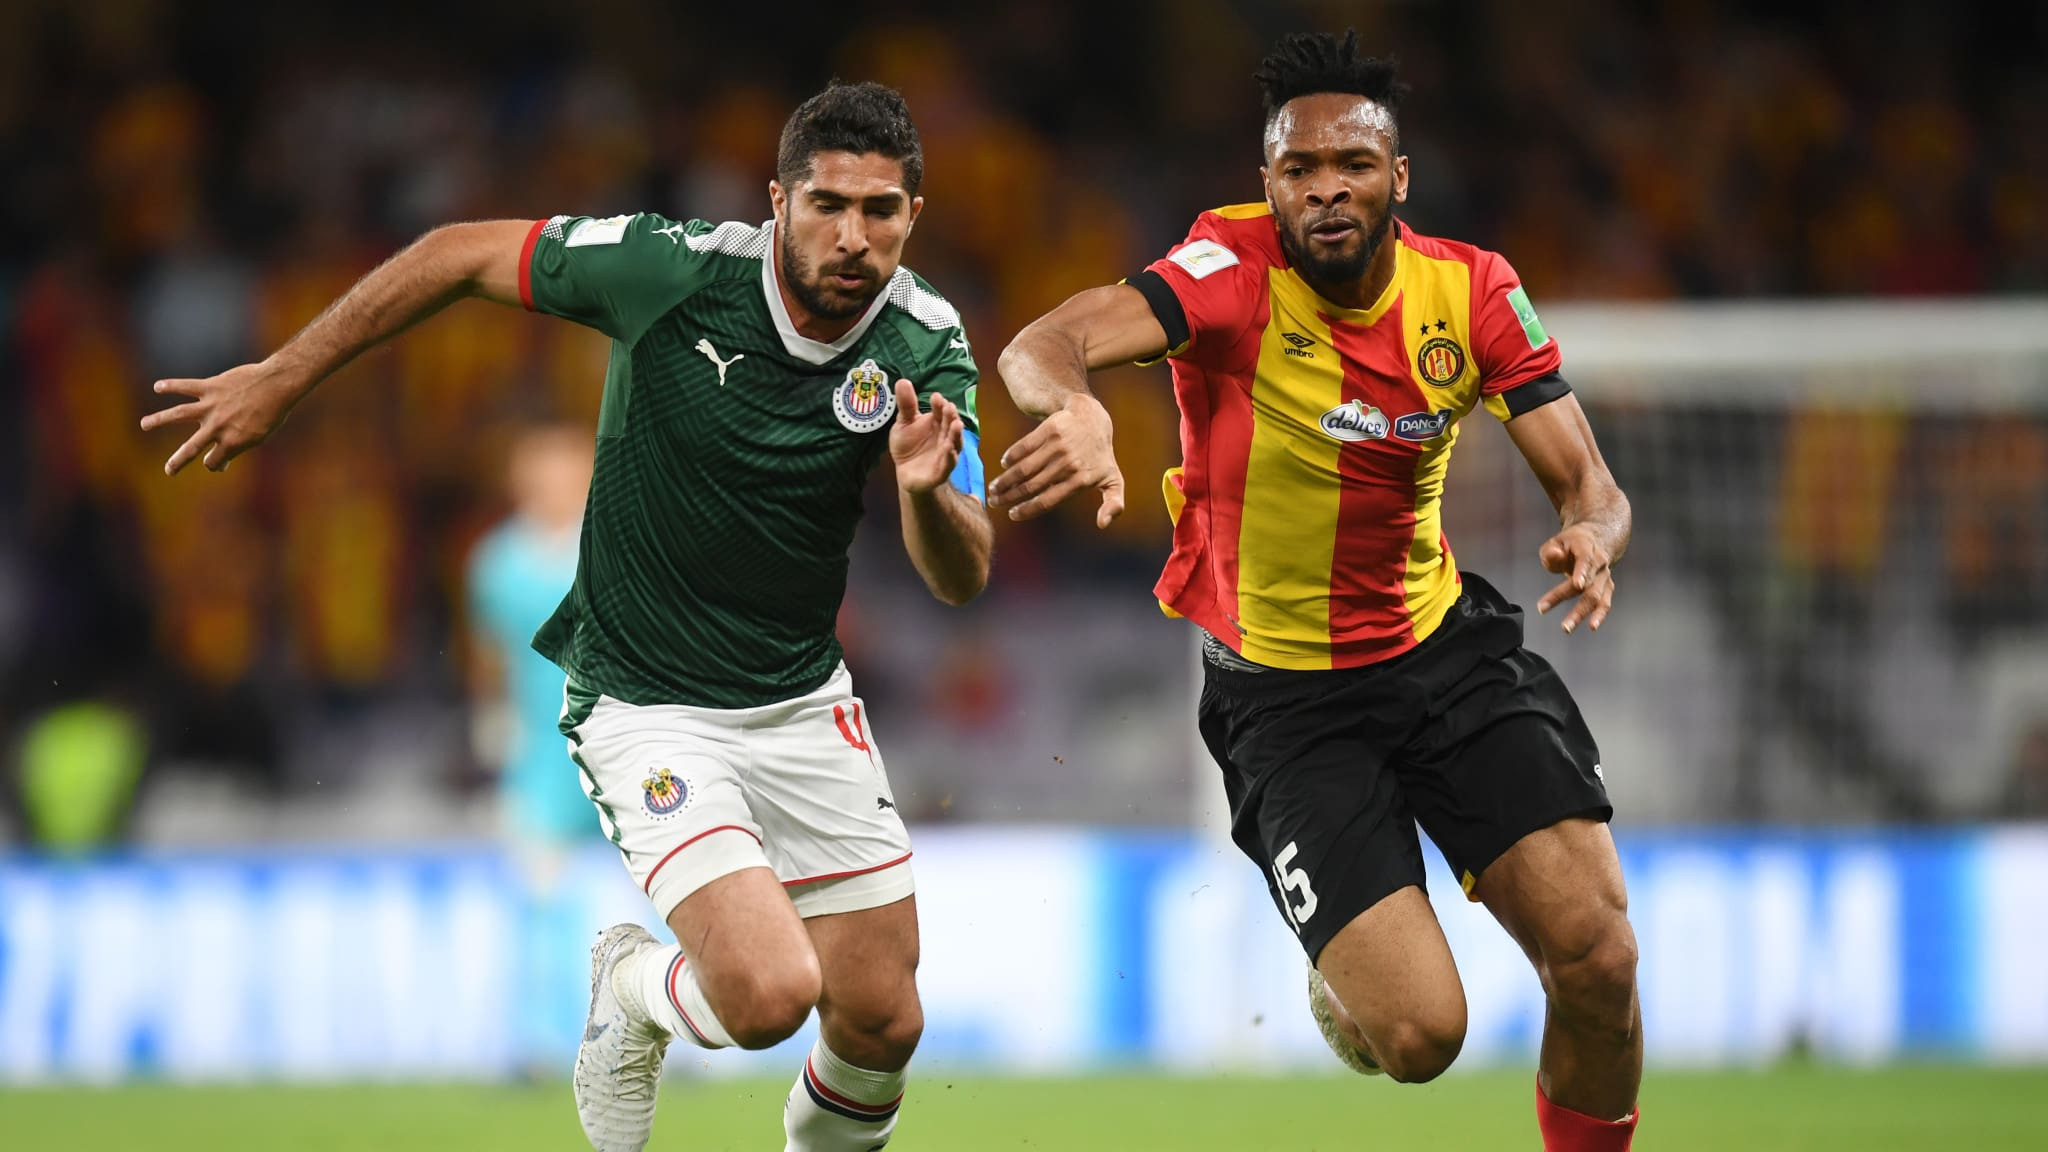 Esperance de Tunis, in stripes, beat Guadalajara 6-5 on penalties after finishing at 1-1 in their fifth-place match ©Getty Images